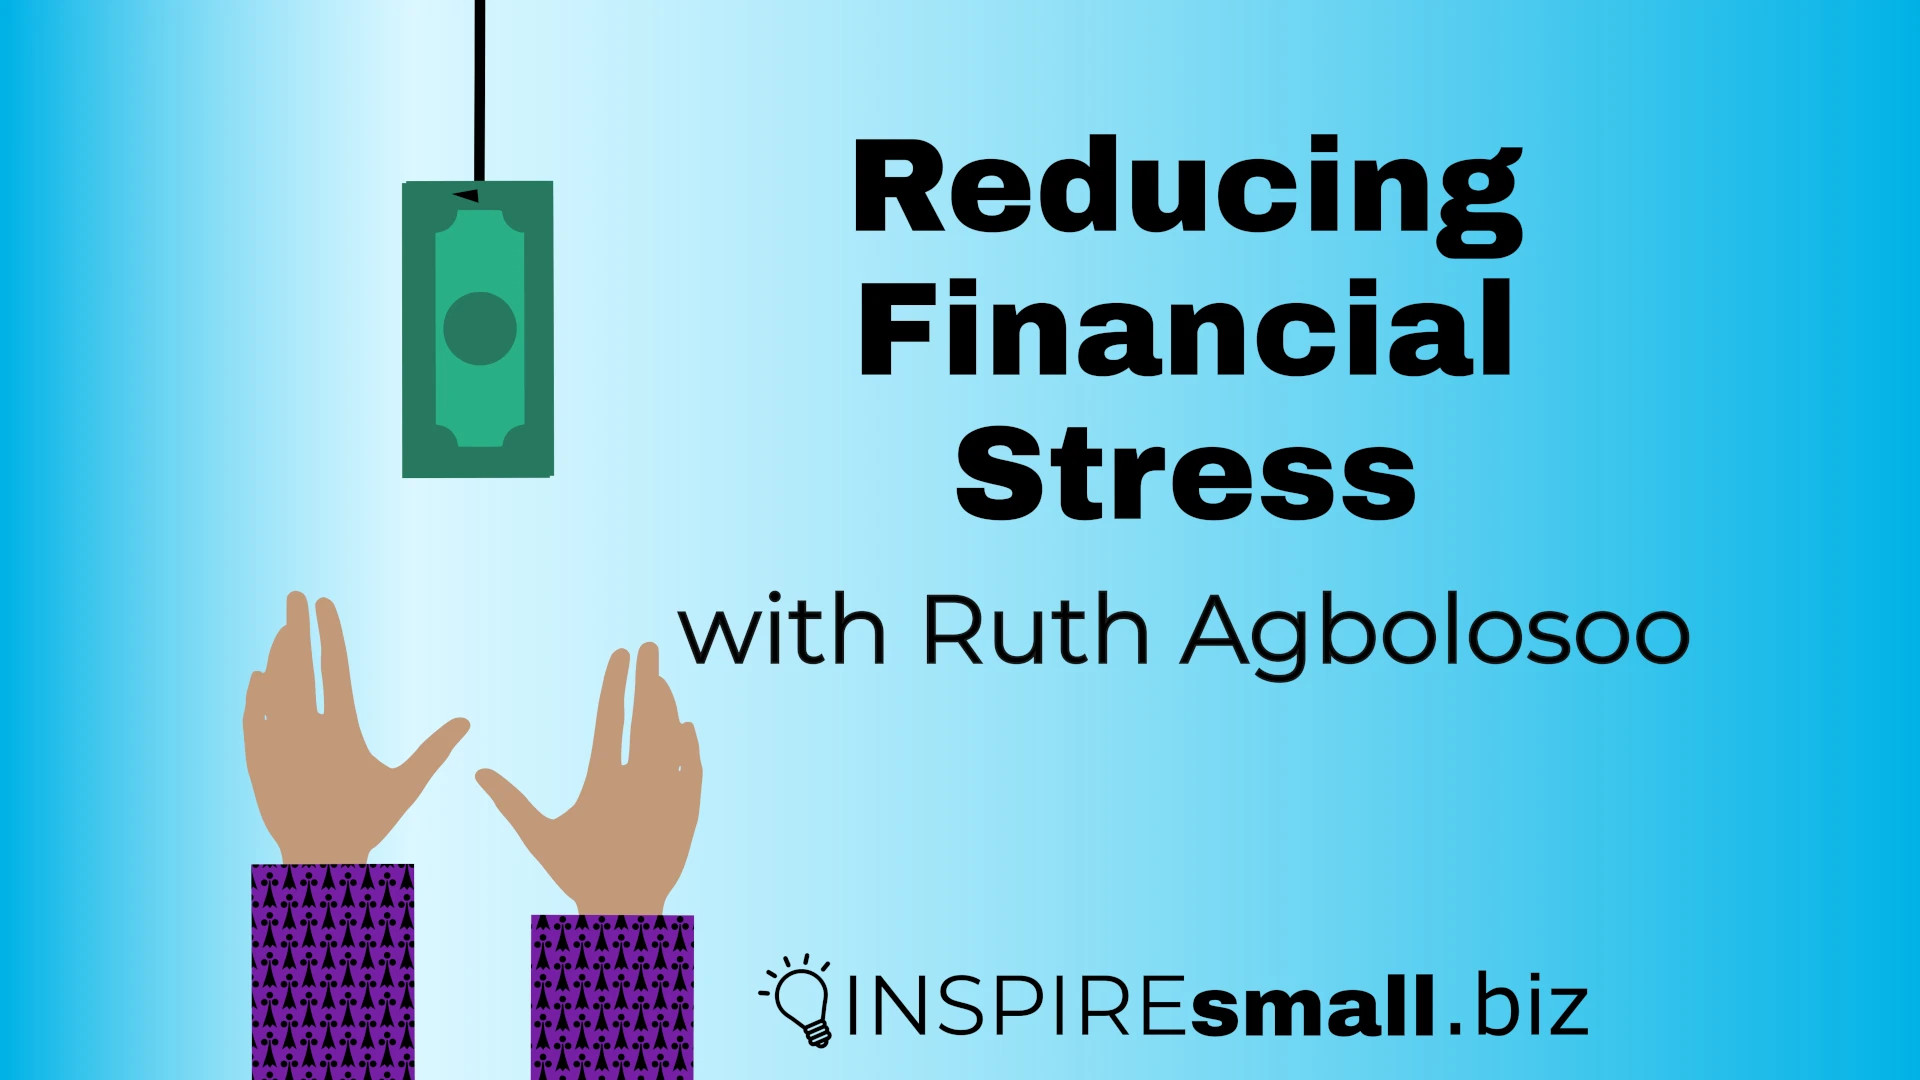 Image of a person reaching for a dollar on a fishing line with text that reads 'Reducing Financial Stress with Ruth Agbolosoo'